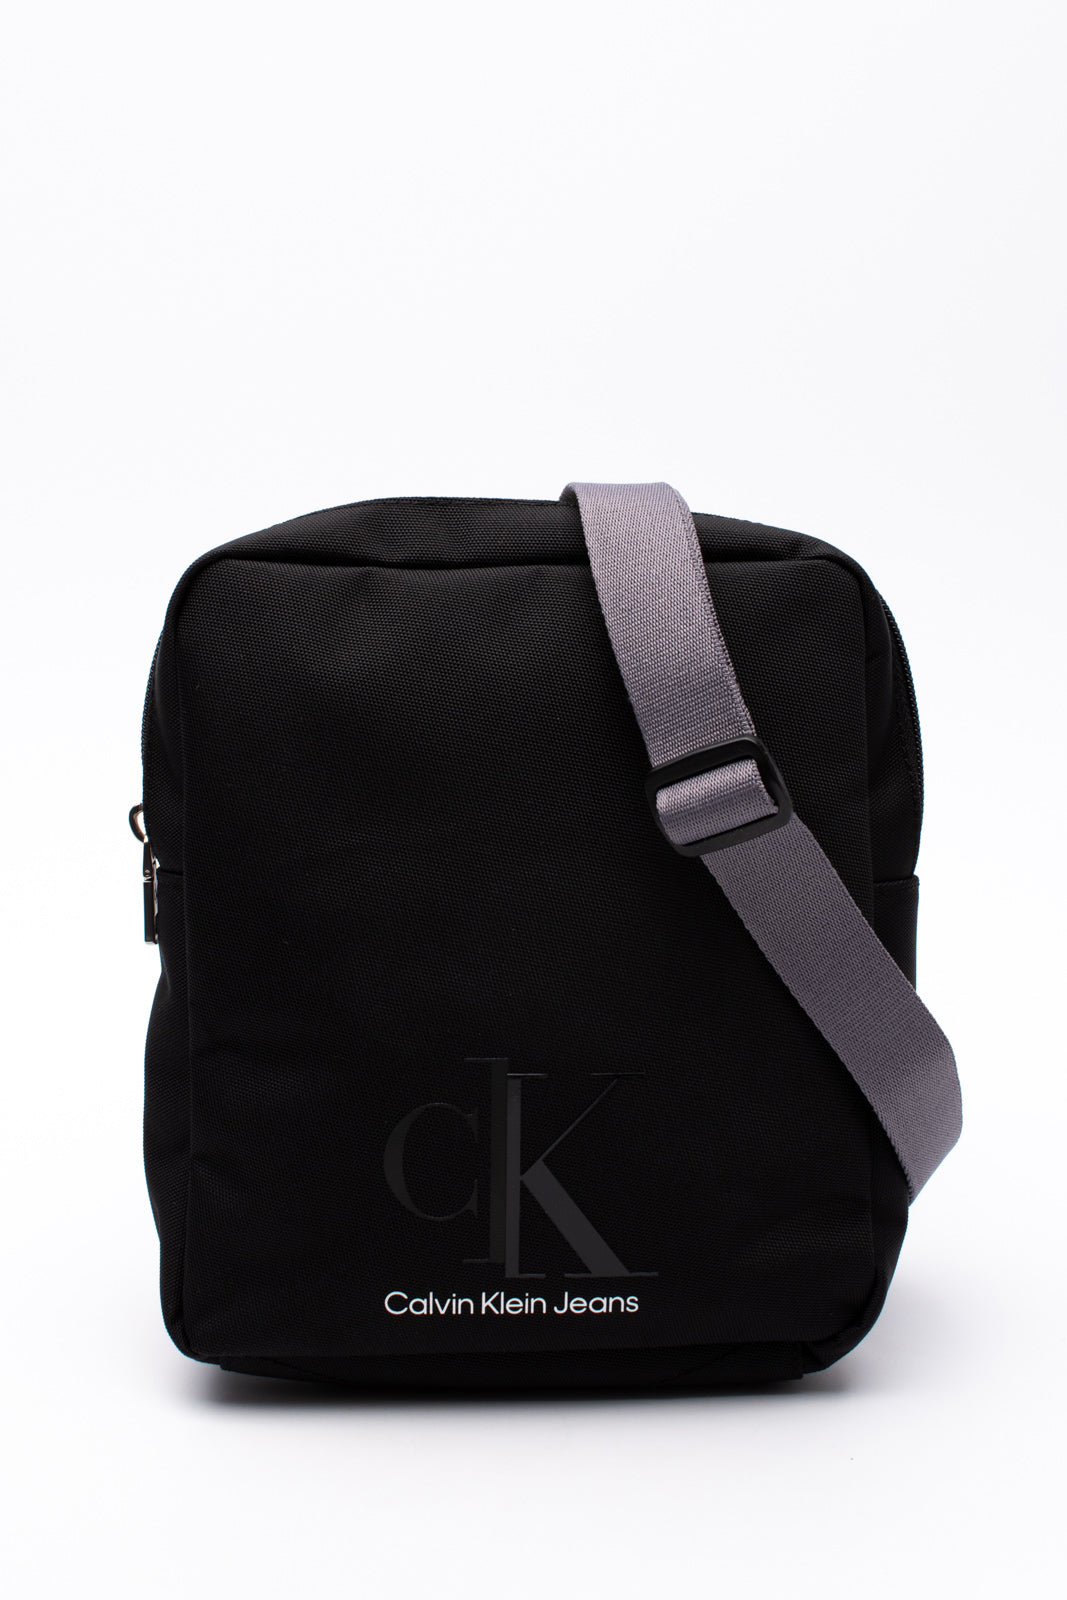 CALVIN KLEIN JEANS Sport Essentials Crossbody Bag Recycled Adjustable Strap gallery main photo